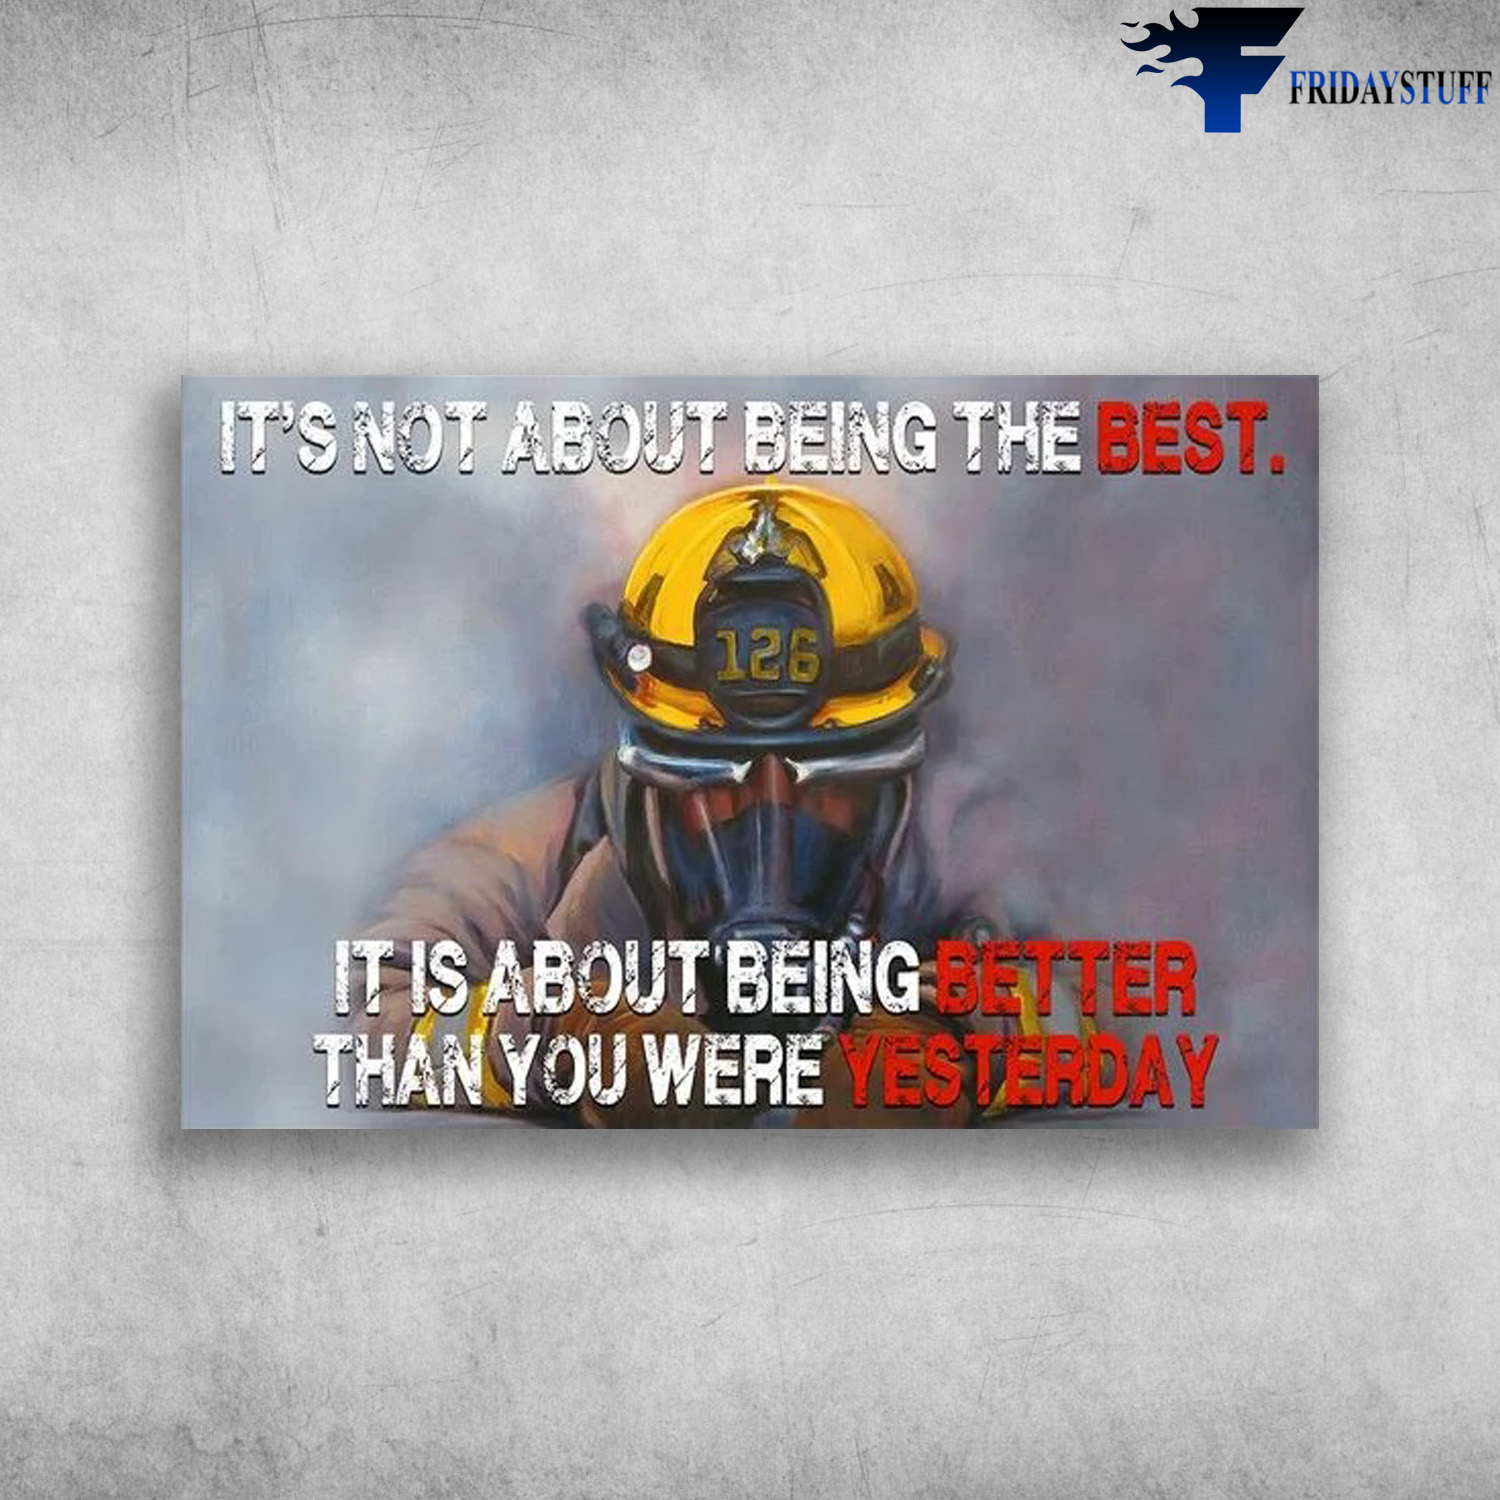 The Firefighter - It's Not About Being The Best, It Is About Being Better, Than You Were Yesterday